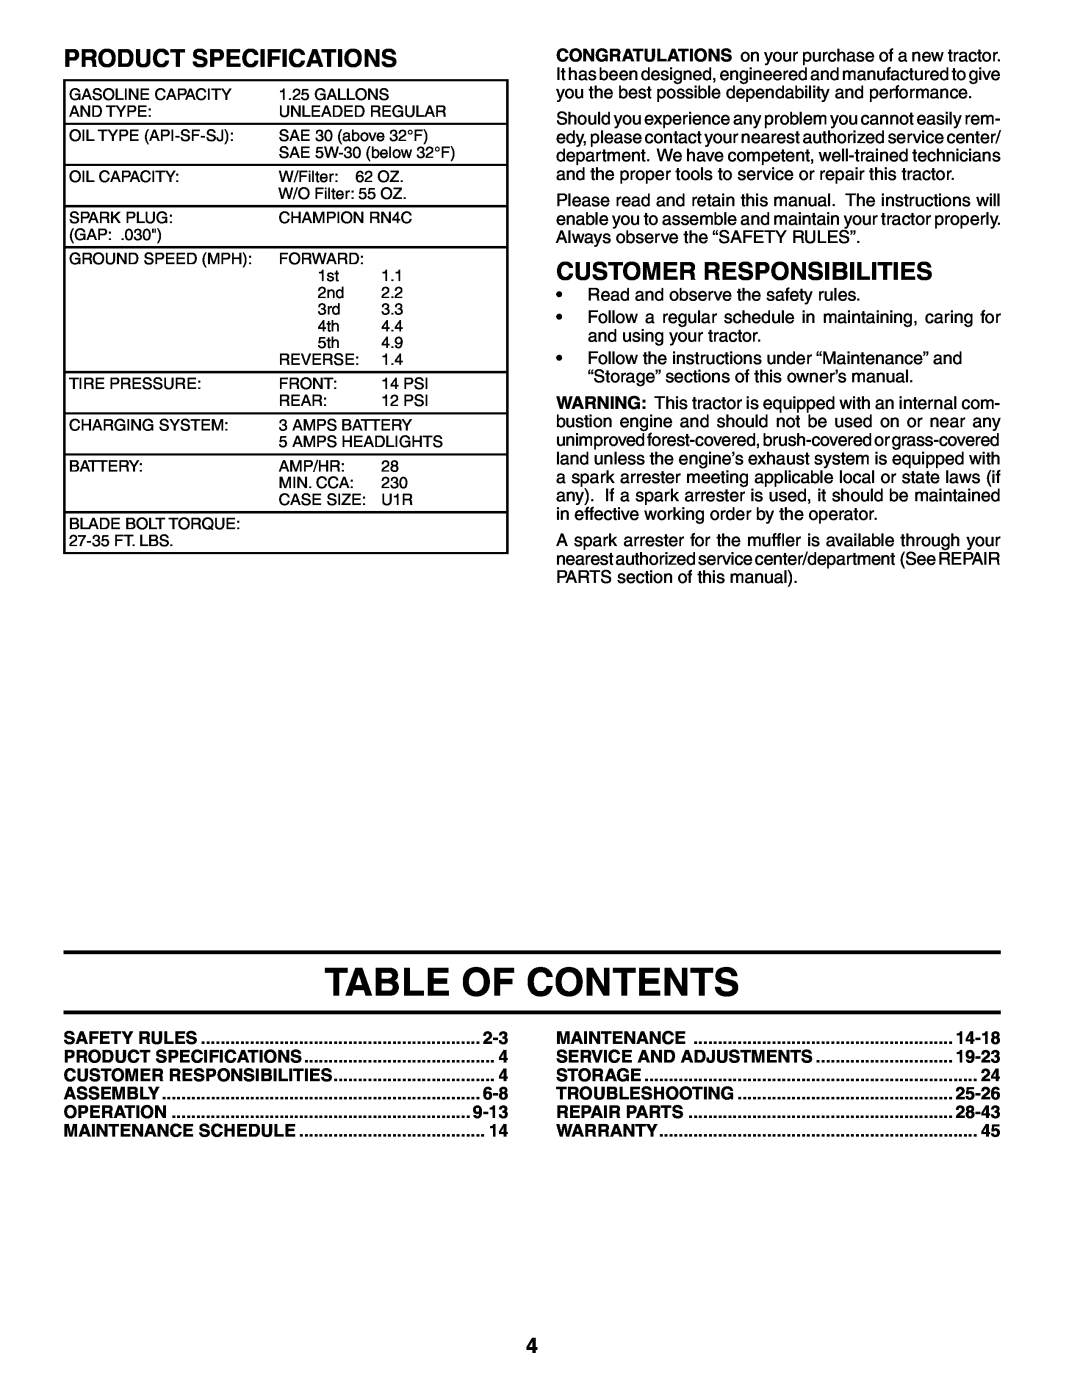 Weed Eater 187637 Table Of Contents, Product Specifications, Customer Responsibilities, 9-13, 14-18, 19-23, 25-26, 28-43 